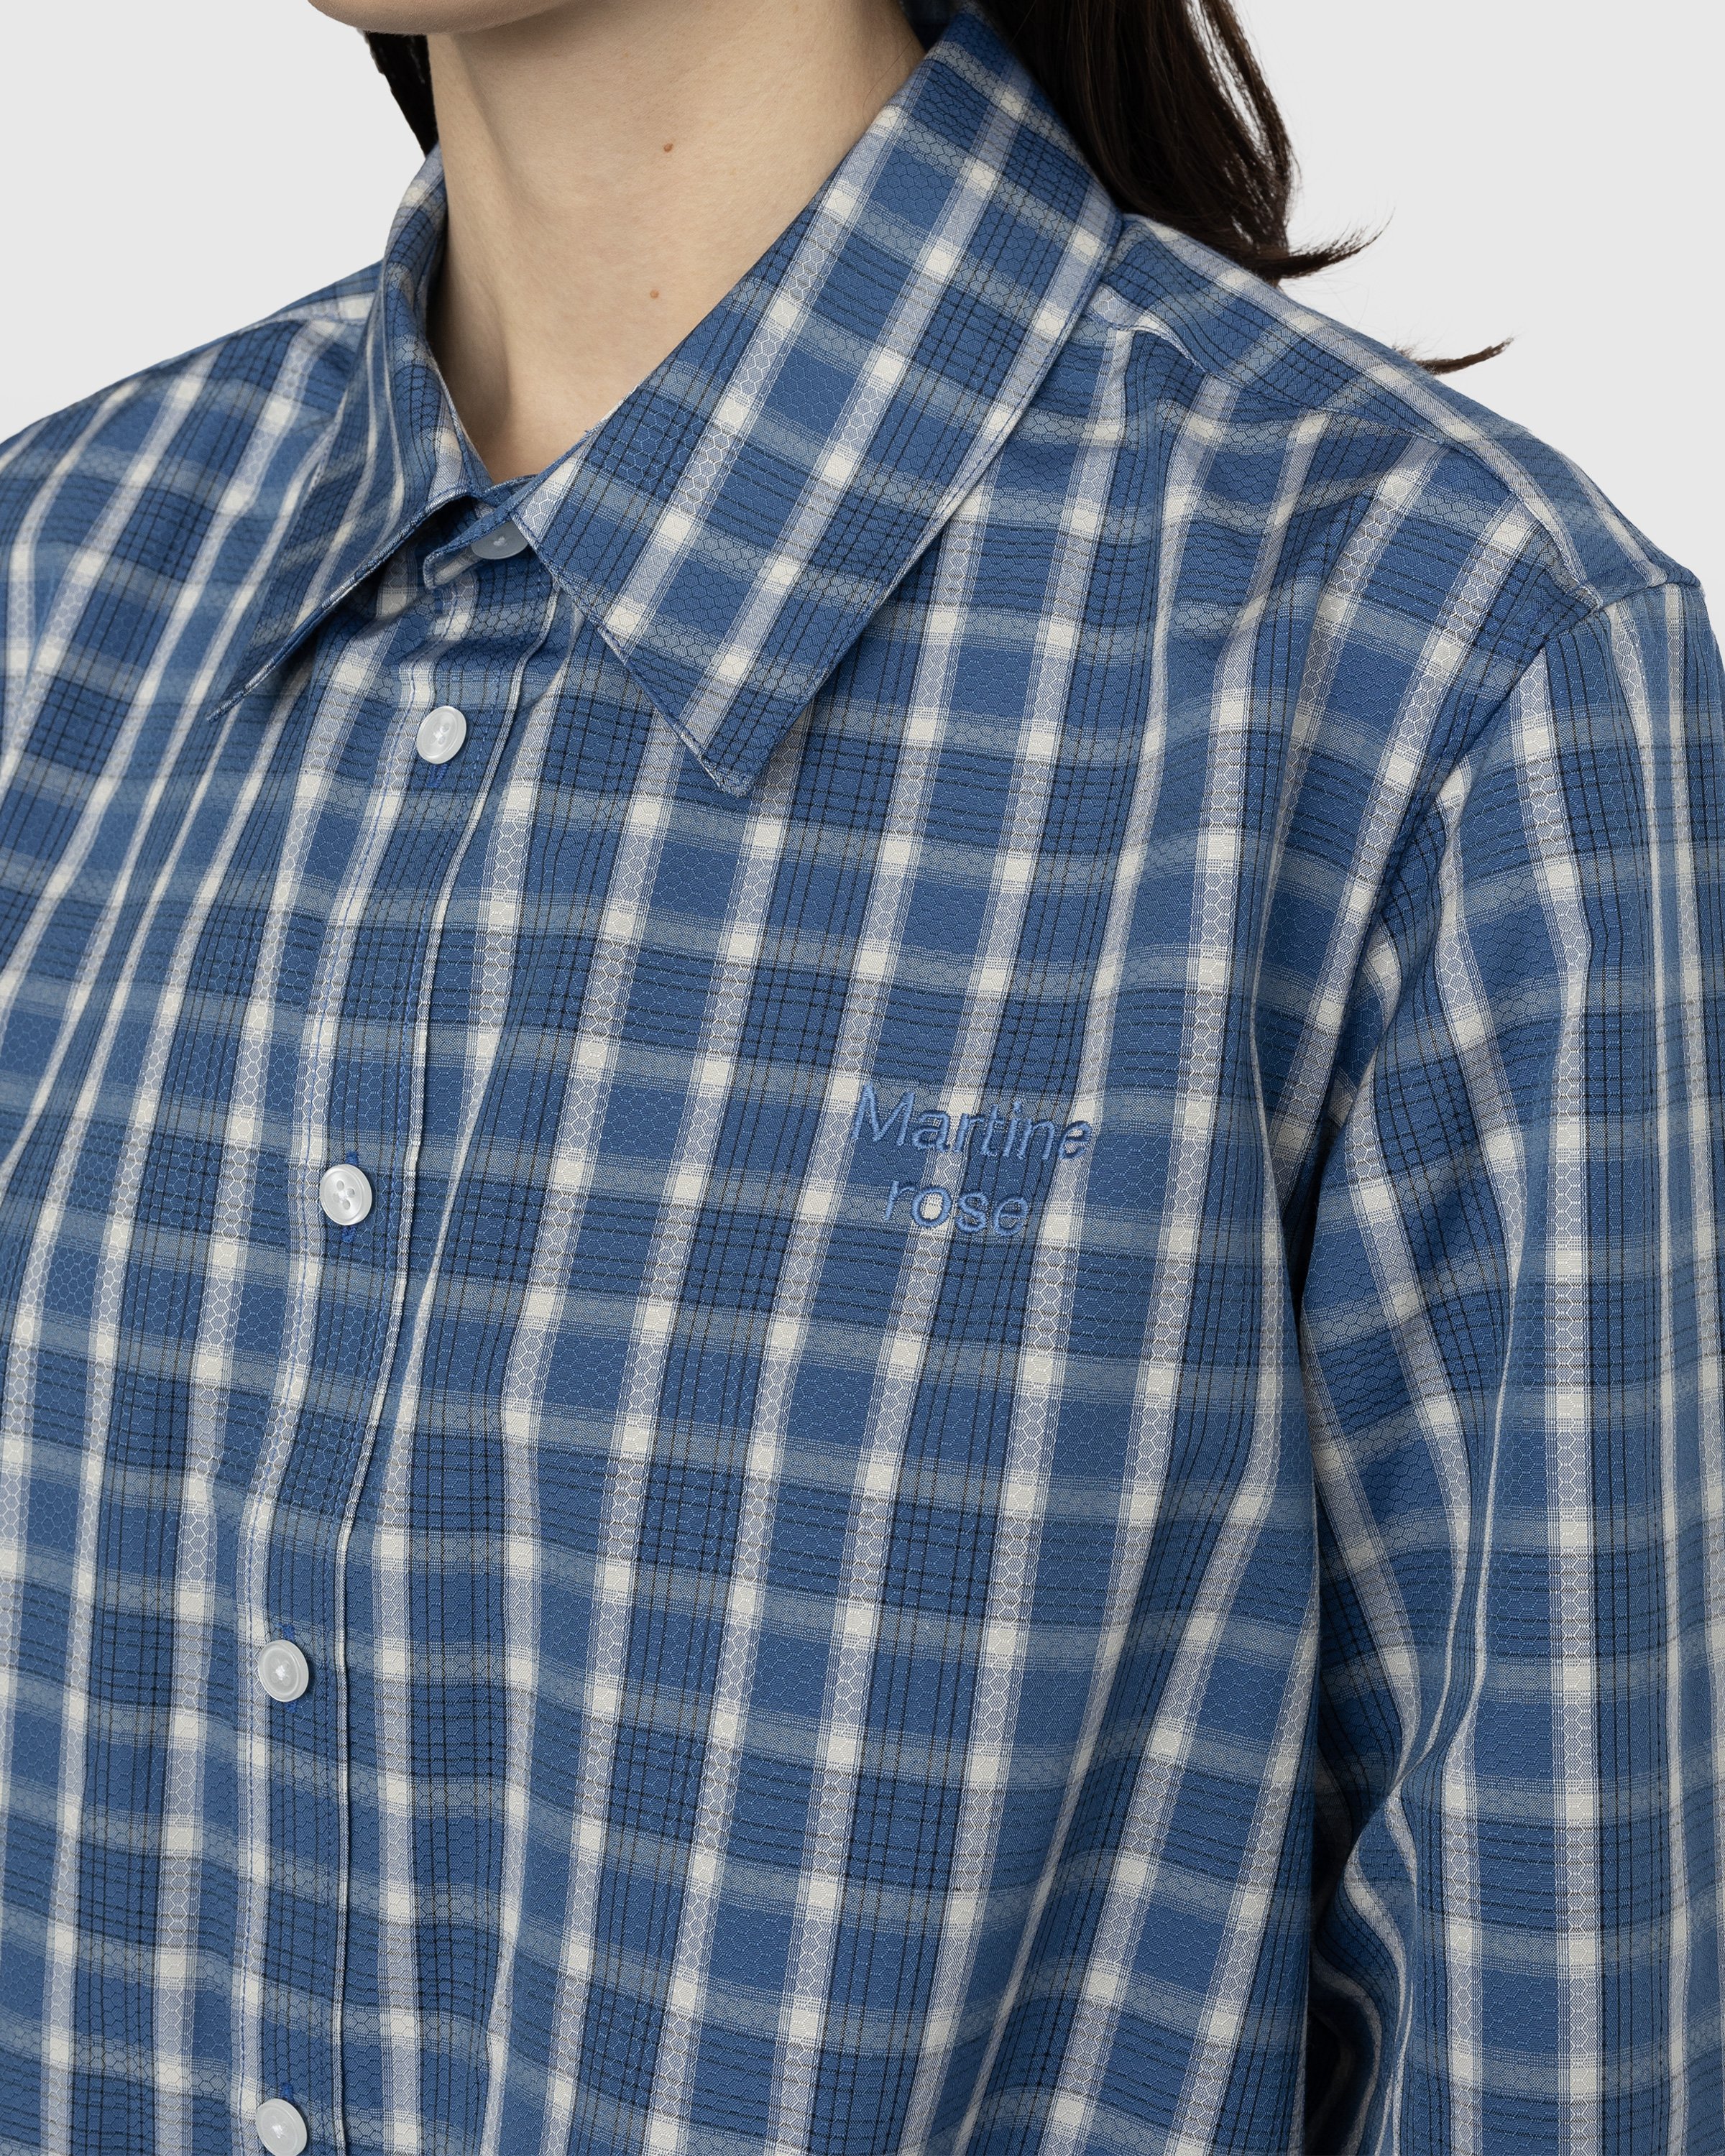 Martine Rose - Classic Check Button-Down Shirt Blue - Clothing - Blue - Image 6